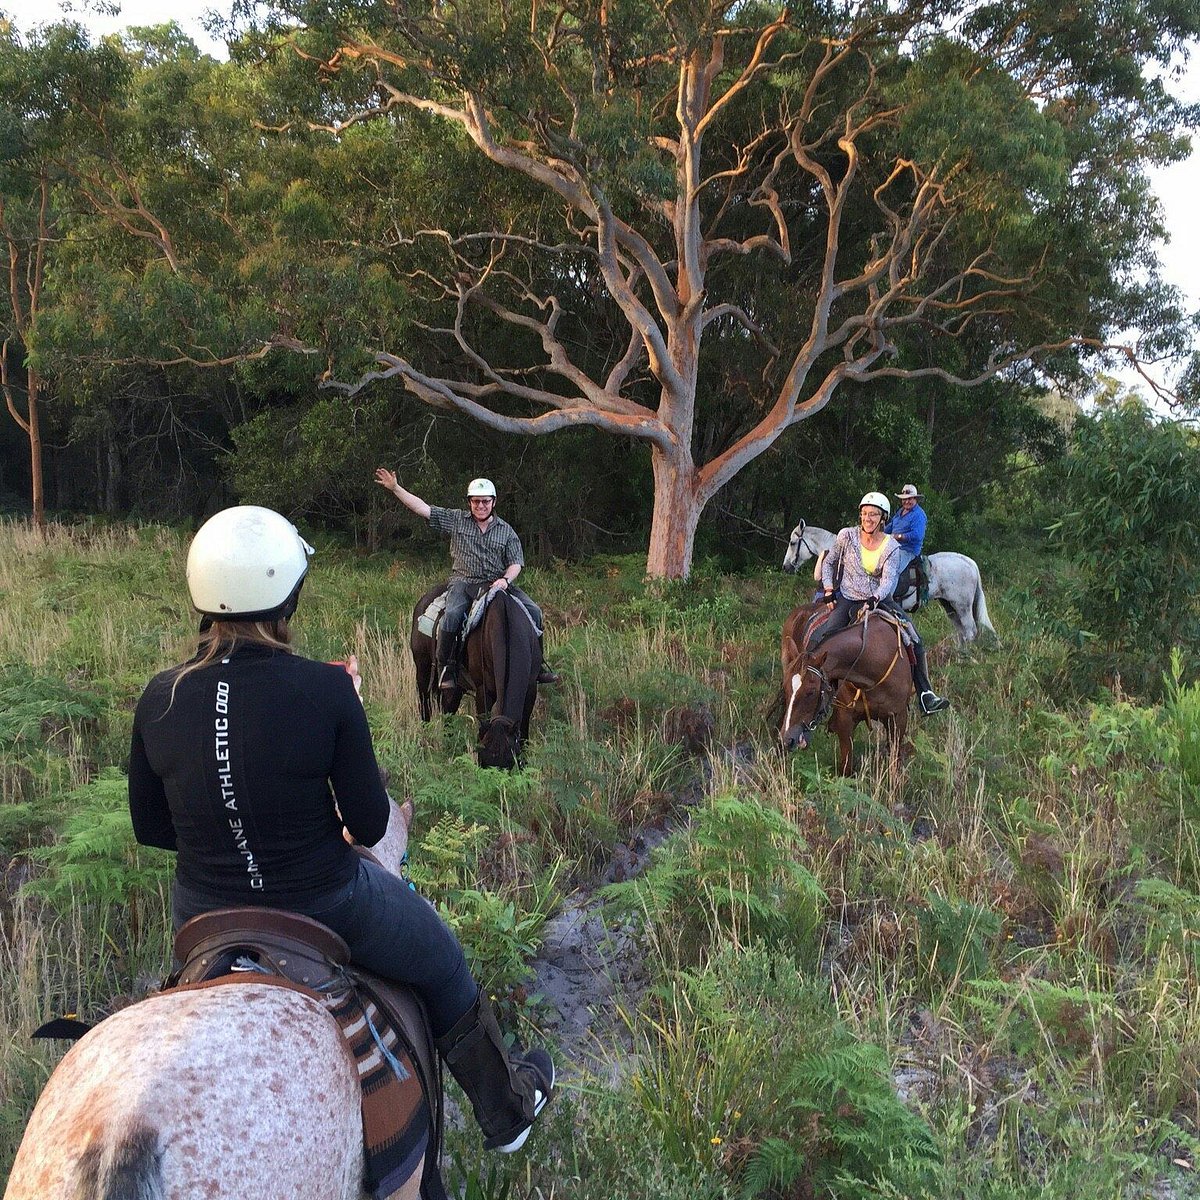 horse about tours tuncurry